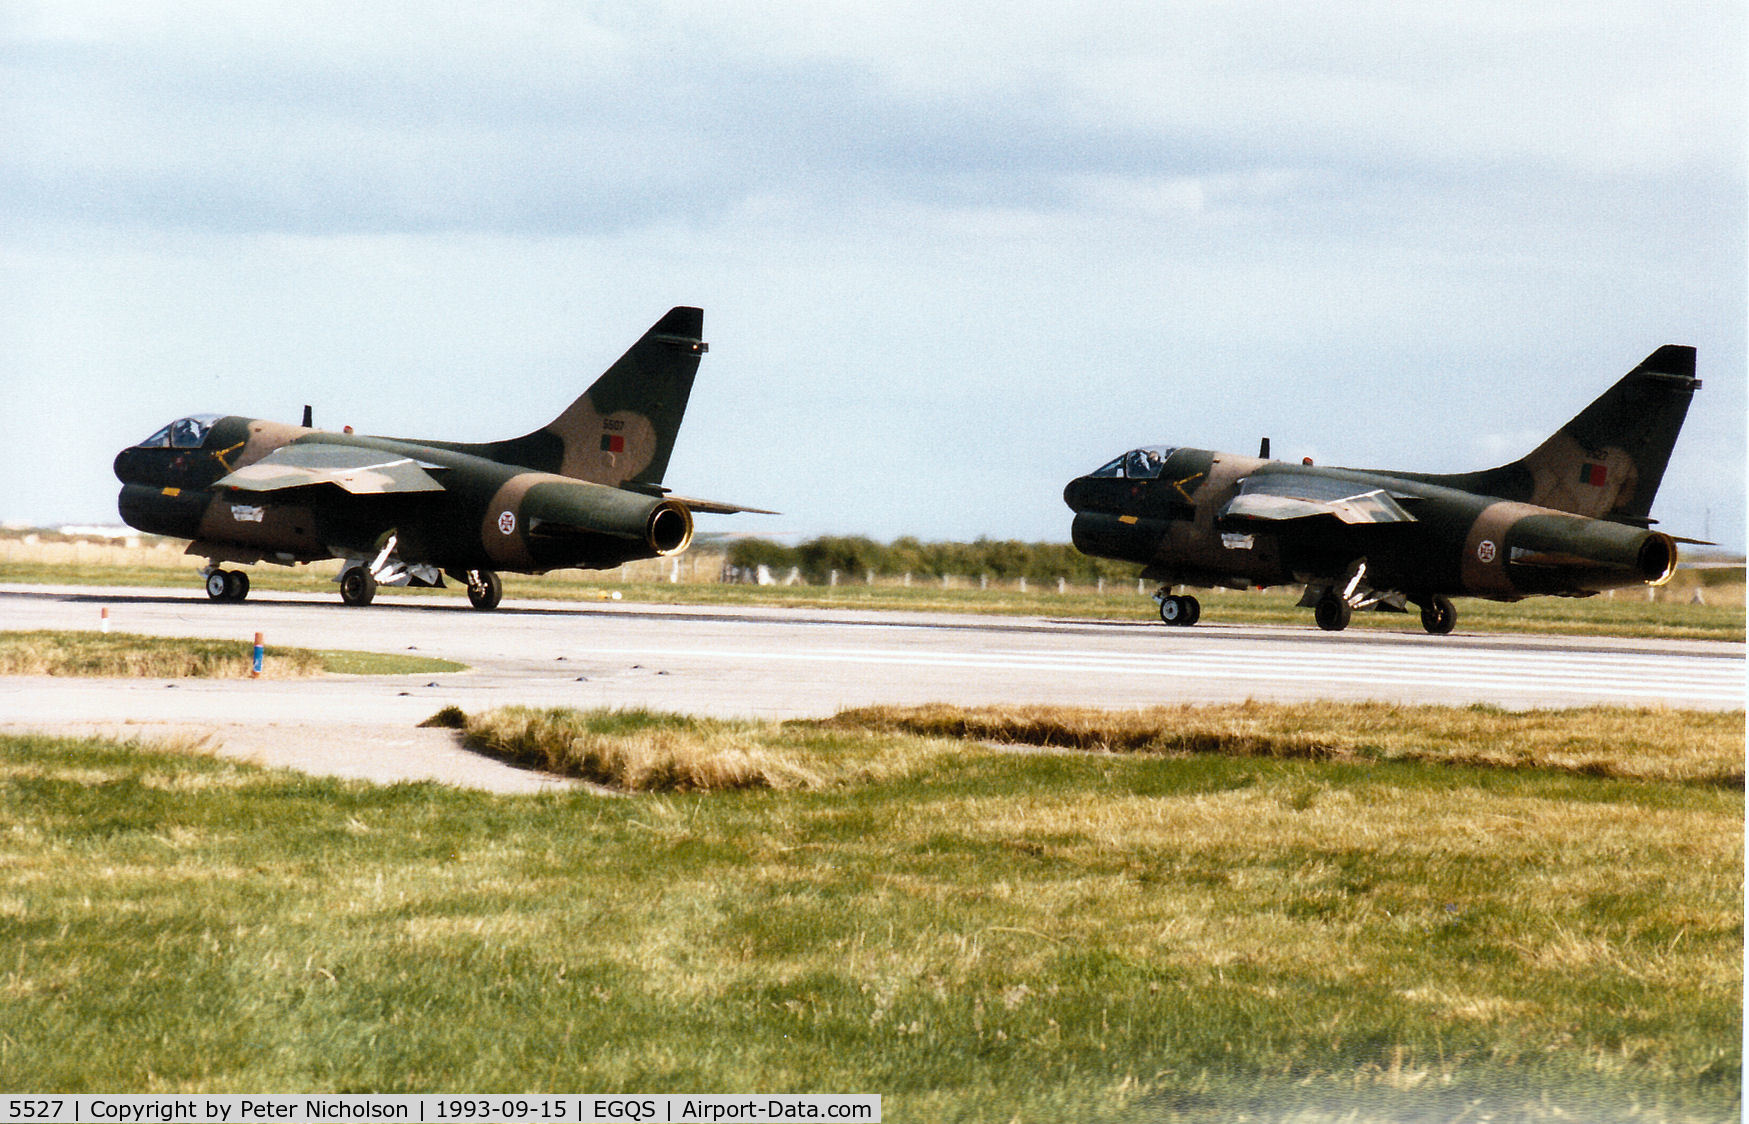 5527, LTV A-7P Corsair II C/N A-088, Portuguese Air Force A-7P Corsair II of 304 Esquadron preparing for take-off with A-7P 5507 on Runway 05 at RAF Lossiemouth in September 1993.